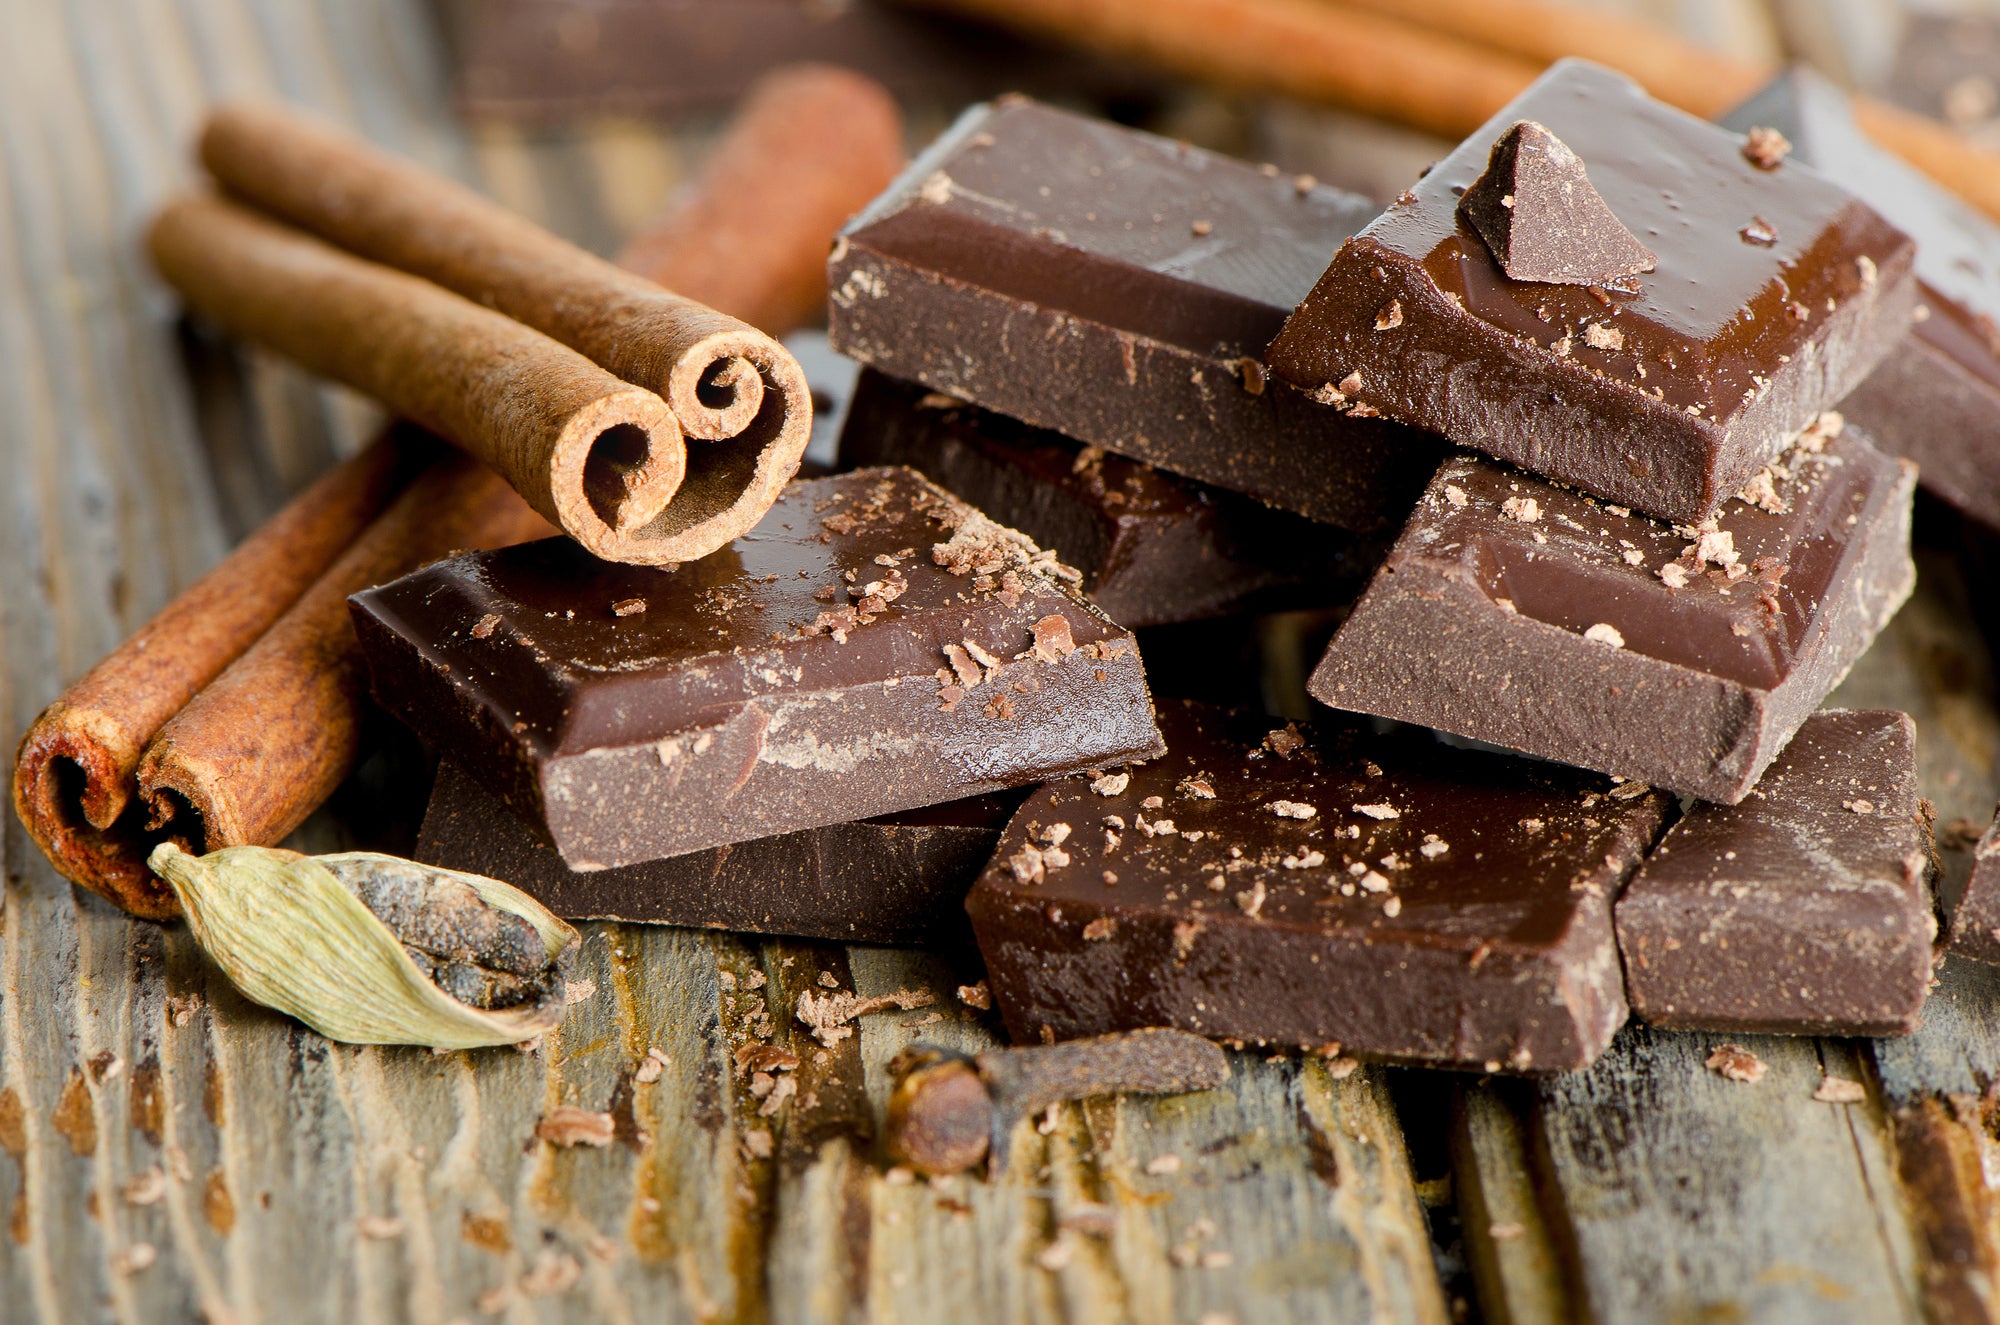 Loco For Choco: Facts about all things Chocolate